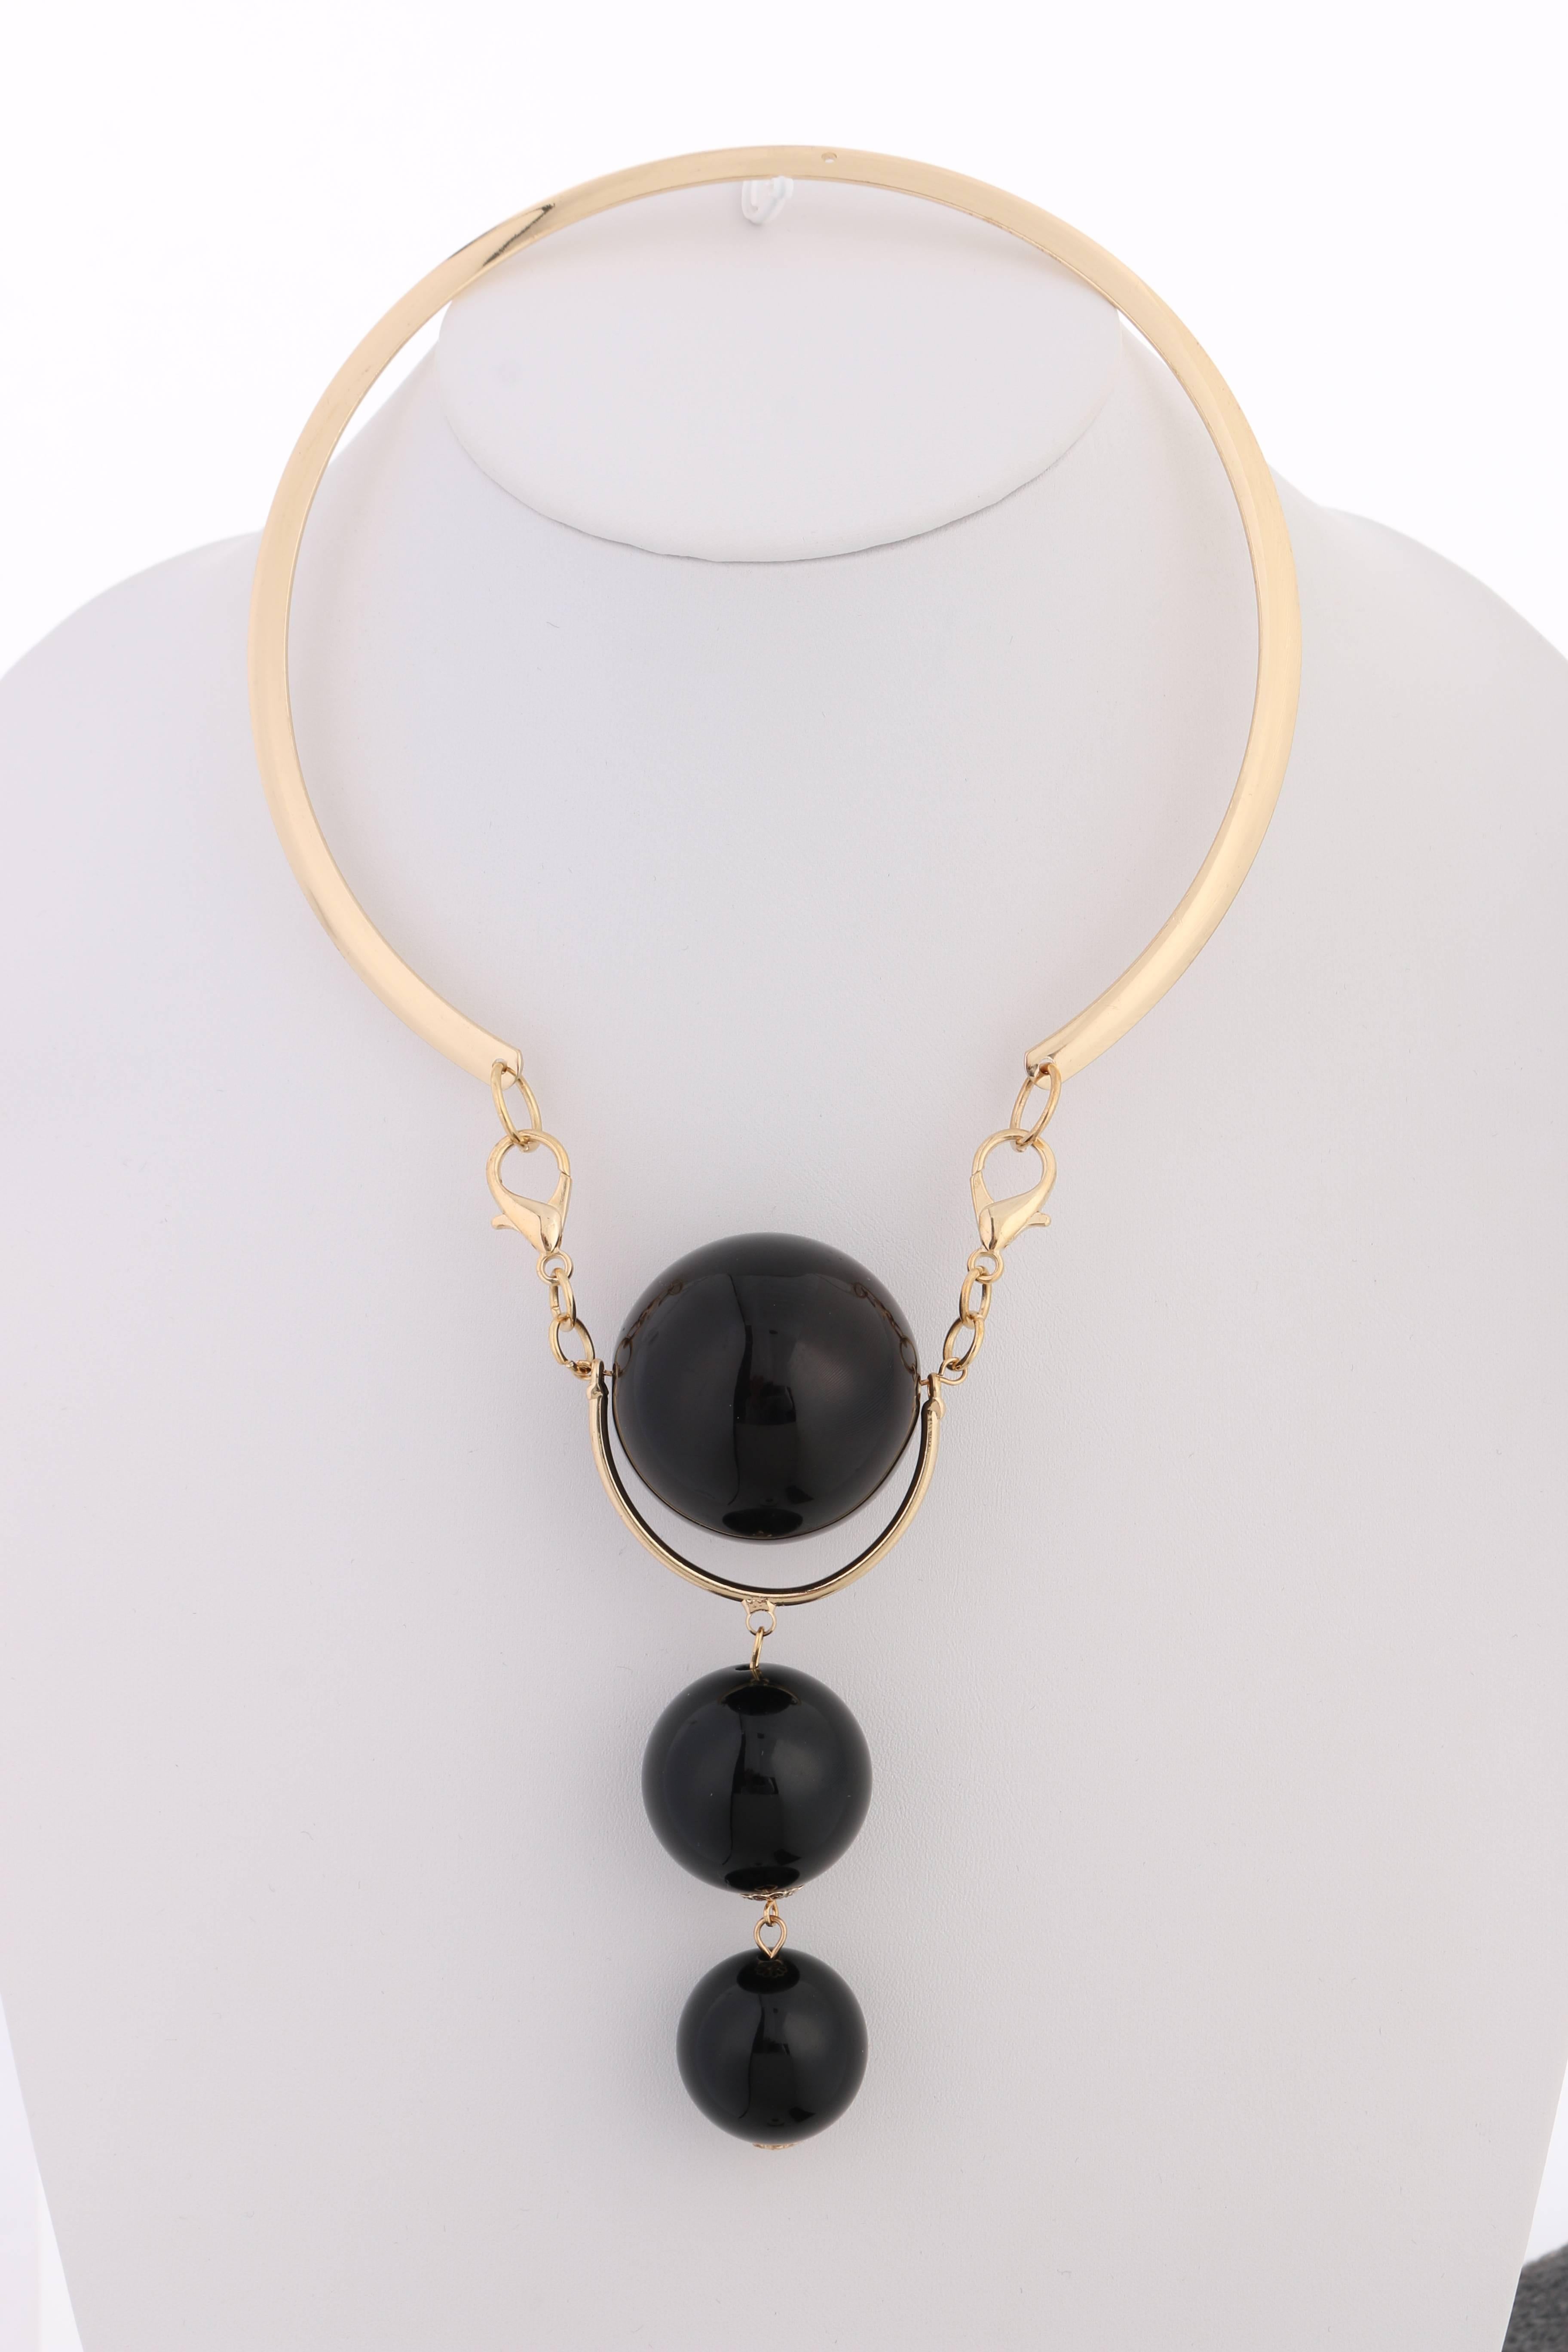 Vintage Versace c.1980's new old stock gold & black modernist sphere pendant choker designed by Ugo Correani. Large modernist pendant made up of three black glossy plastic spheres in varying sizes (38mm - 25mm). Bottom two spheres hang from a thin